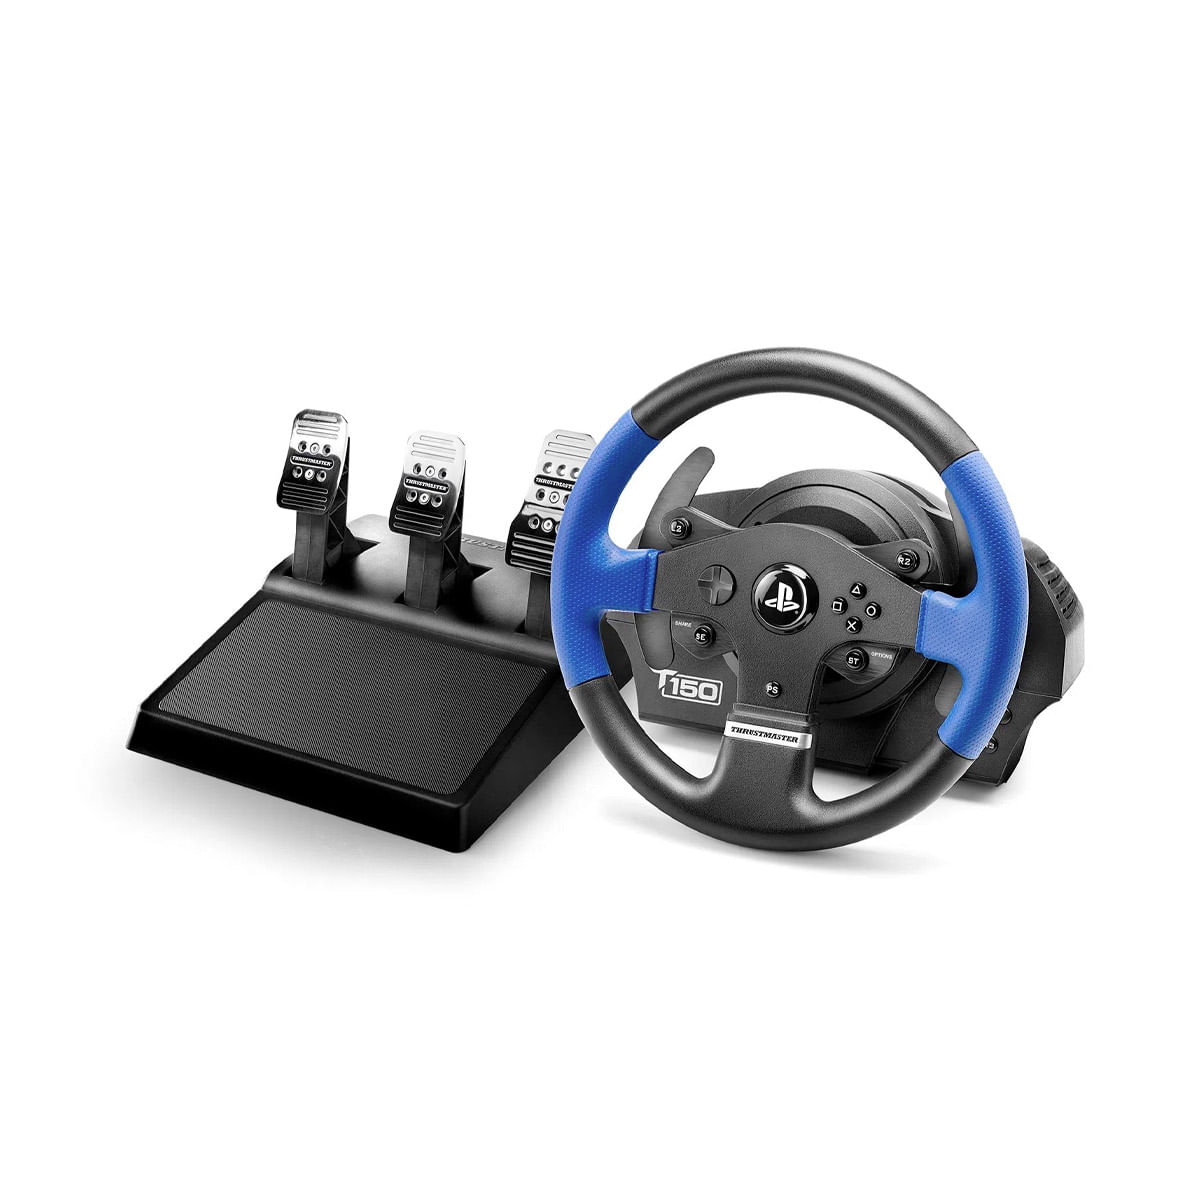 Thrustmaster Volante Gamer para PS3 PS4 T150 Pro Force 4168059 